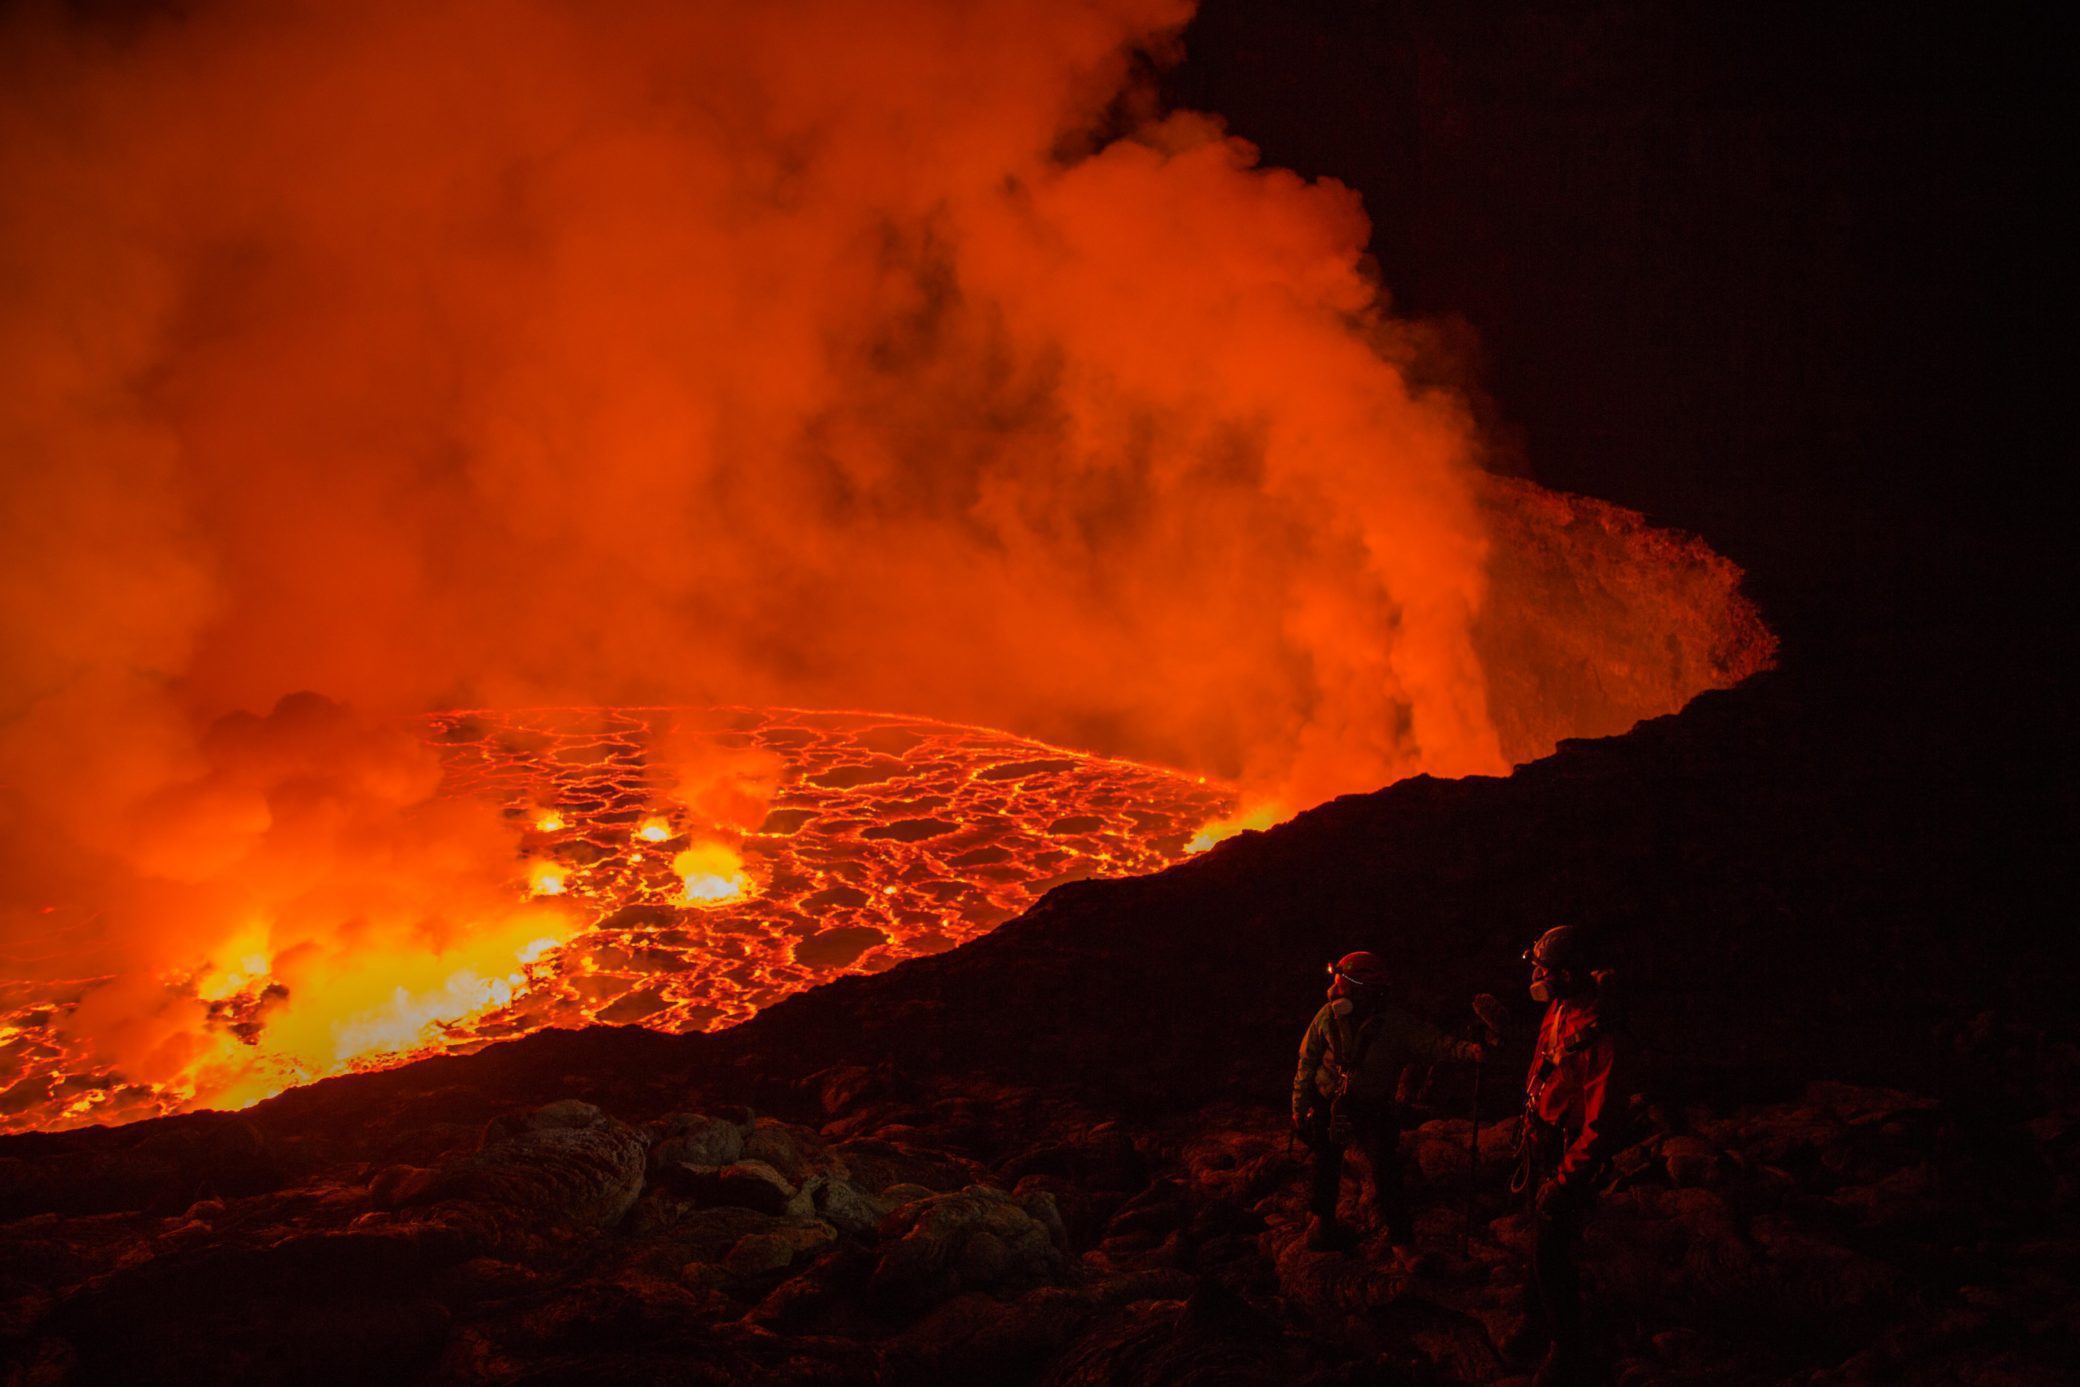 Researchers on the edge of the Nyiragongo crater